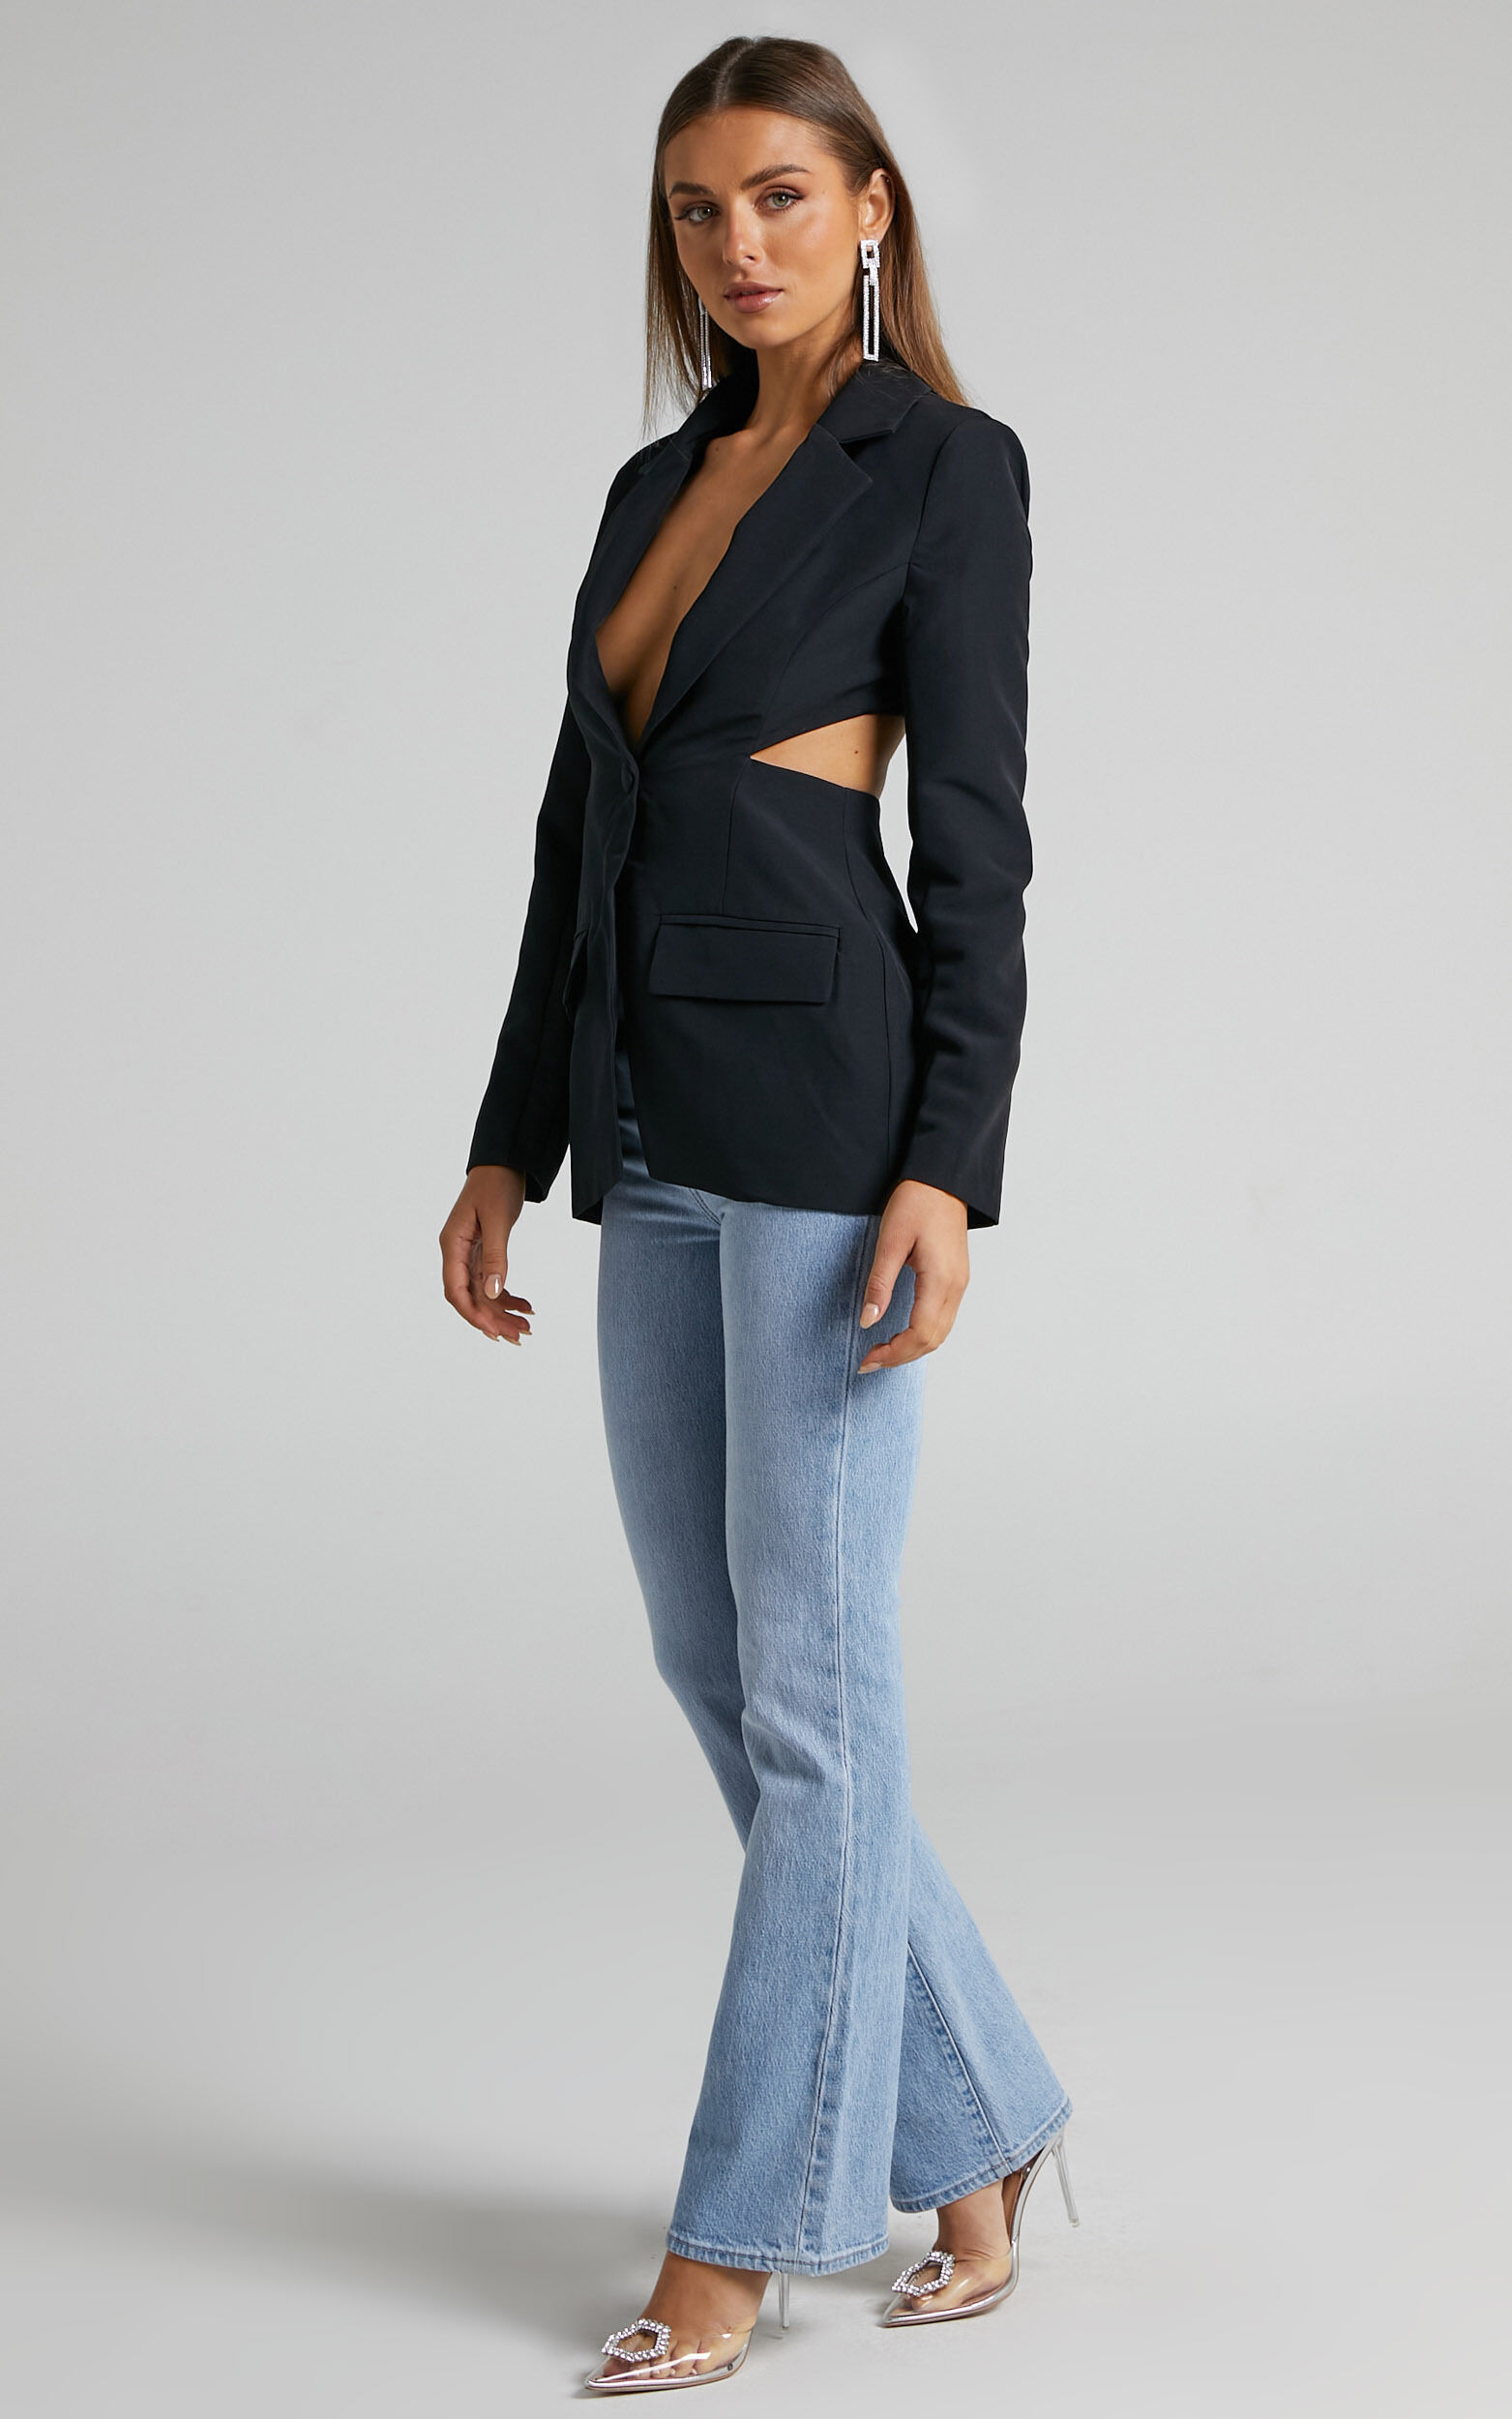 Chona Tailored Hourglass Cut Out Blazer in Black - 06, BLK1, super-hi-res image number null